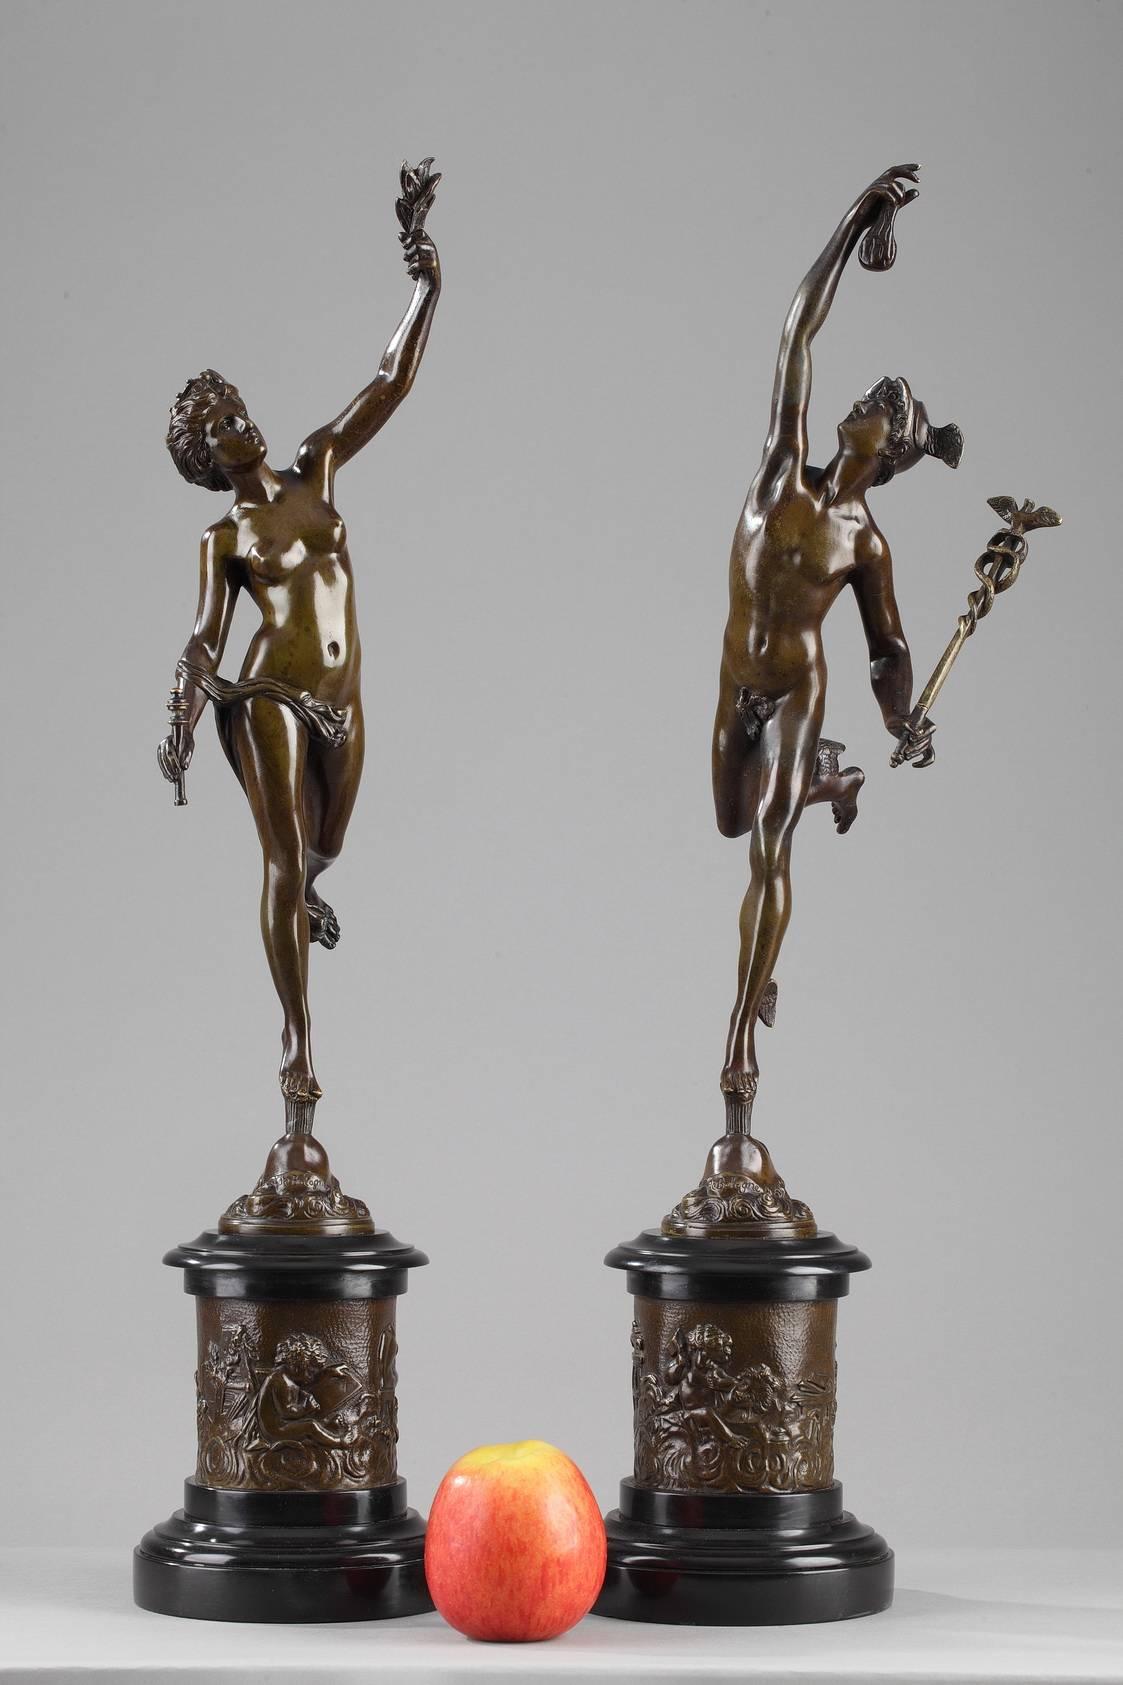 Two patinated bronze sculptures featuring Fortune, the goddess of luck and chance and Mercury, the god of good fortune in Roman mythology. Each divinity is represented with their symbols: Fortune is carrying grains in one hand and a scepter in the